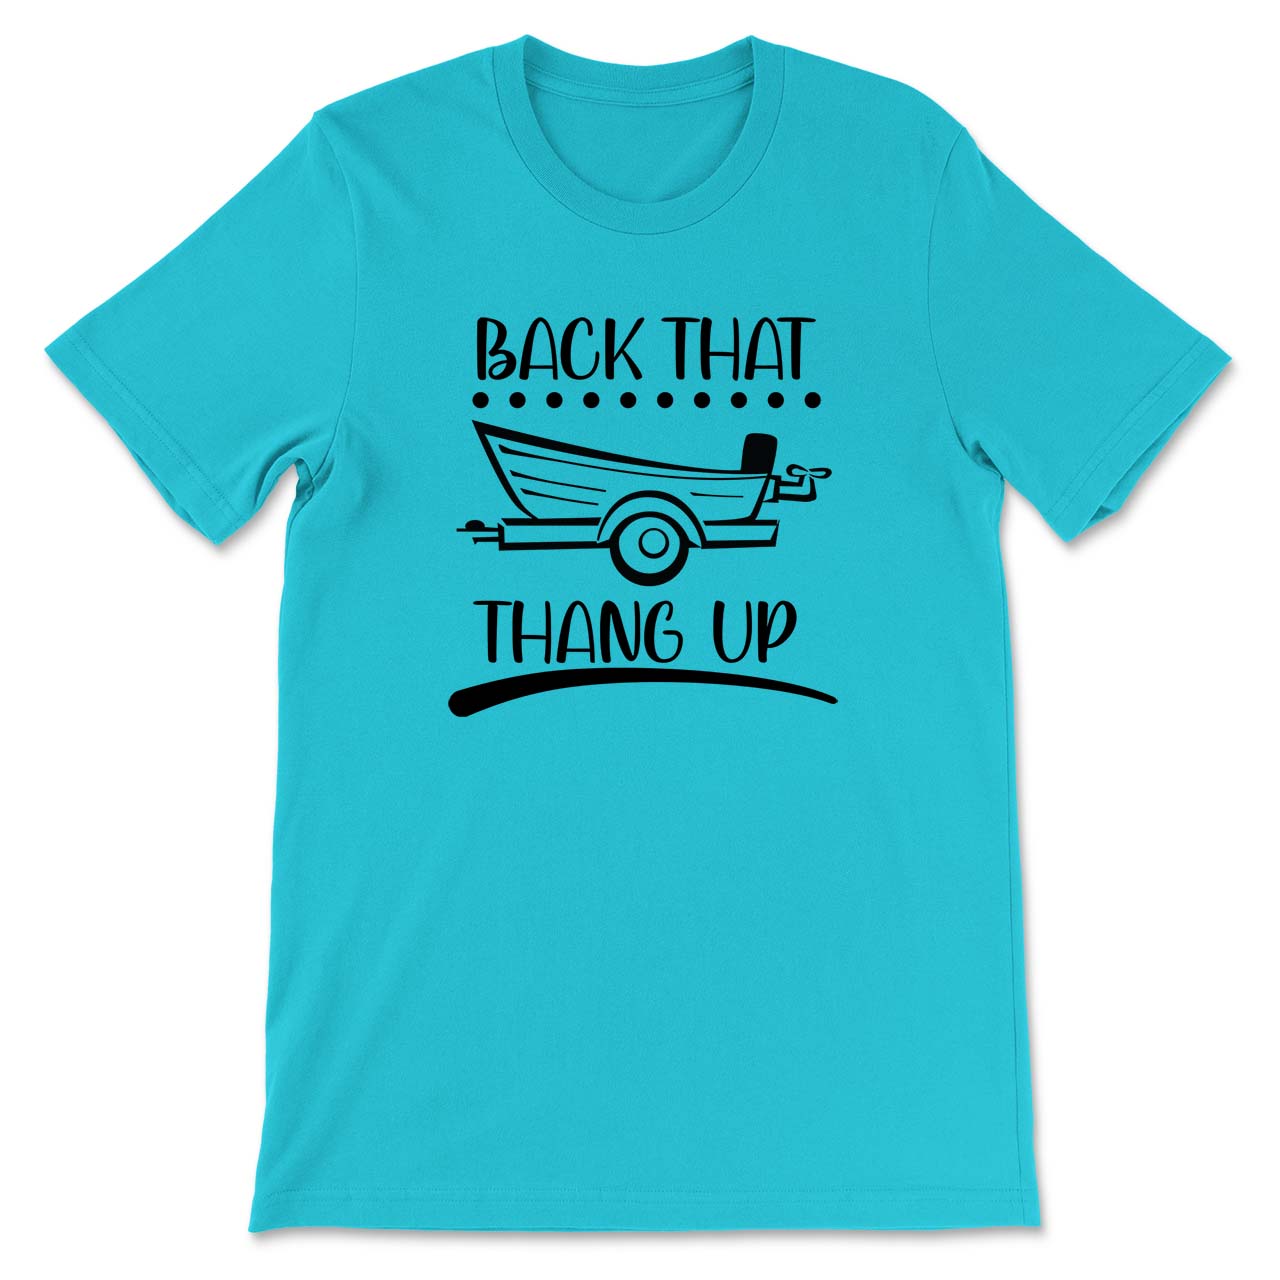 Daydream Tees Back That Thang Up Boat